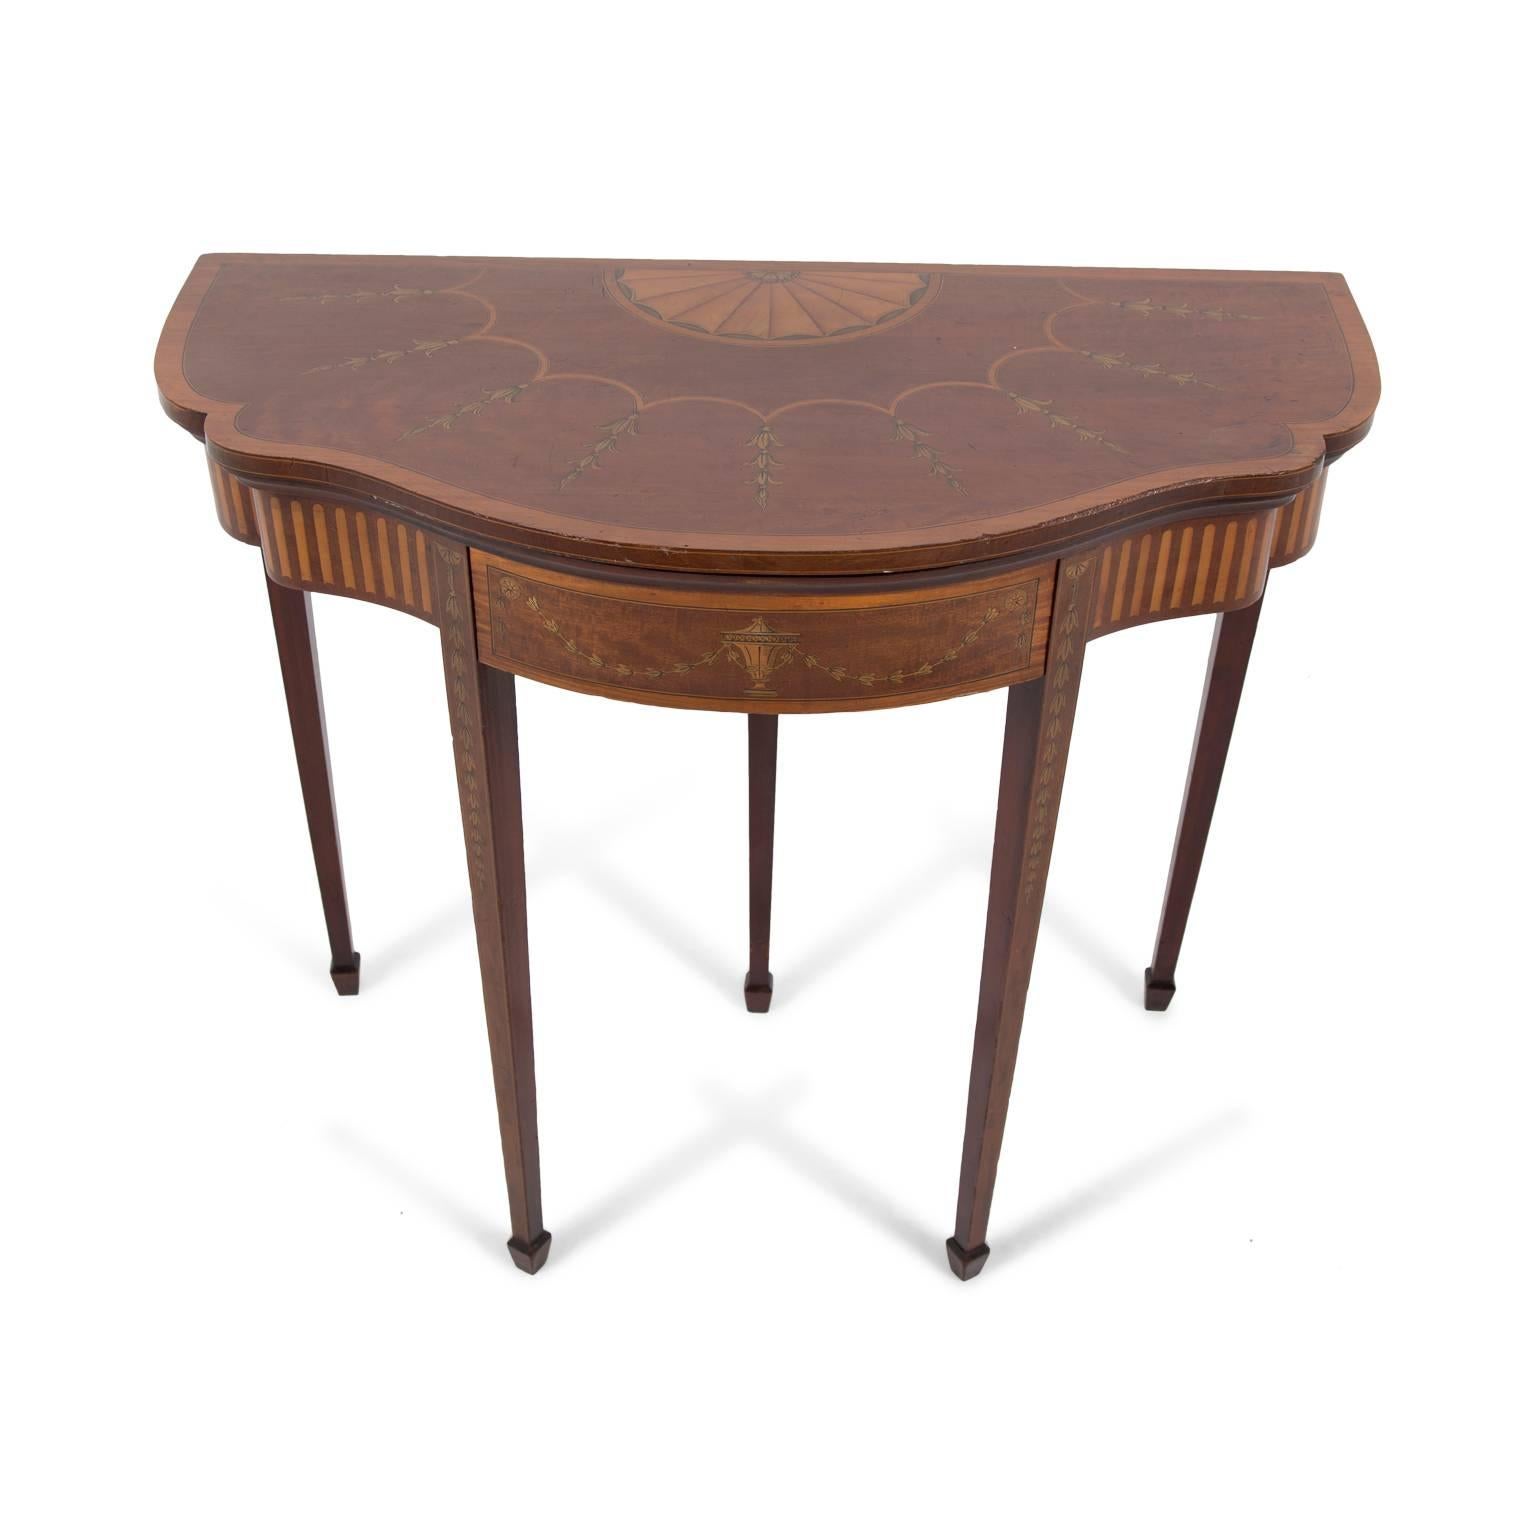 20th Century Fine Quality French Games Table, circa 1910